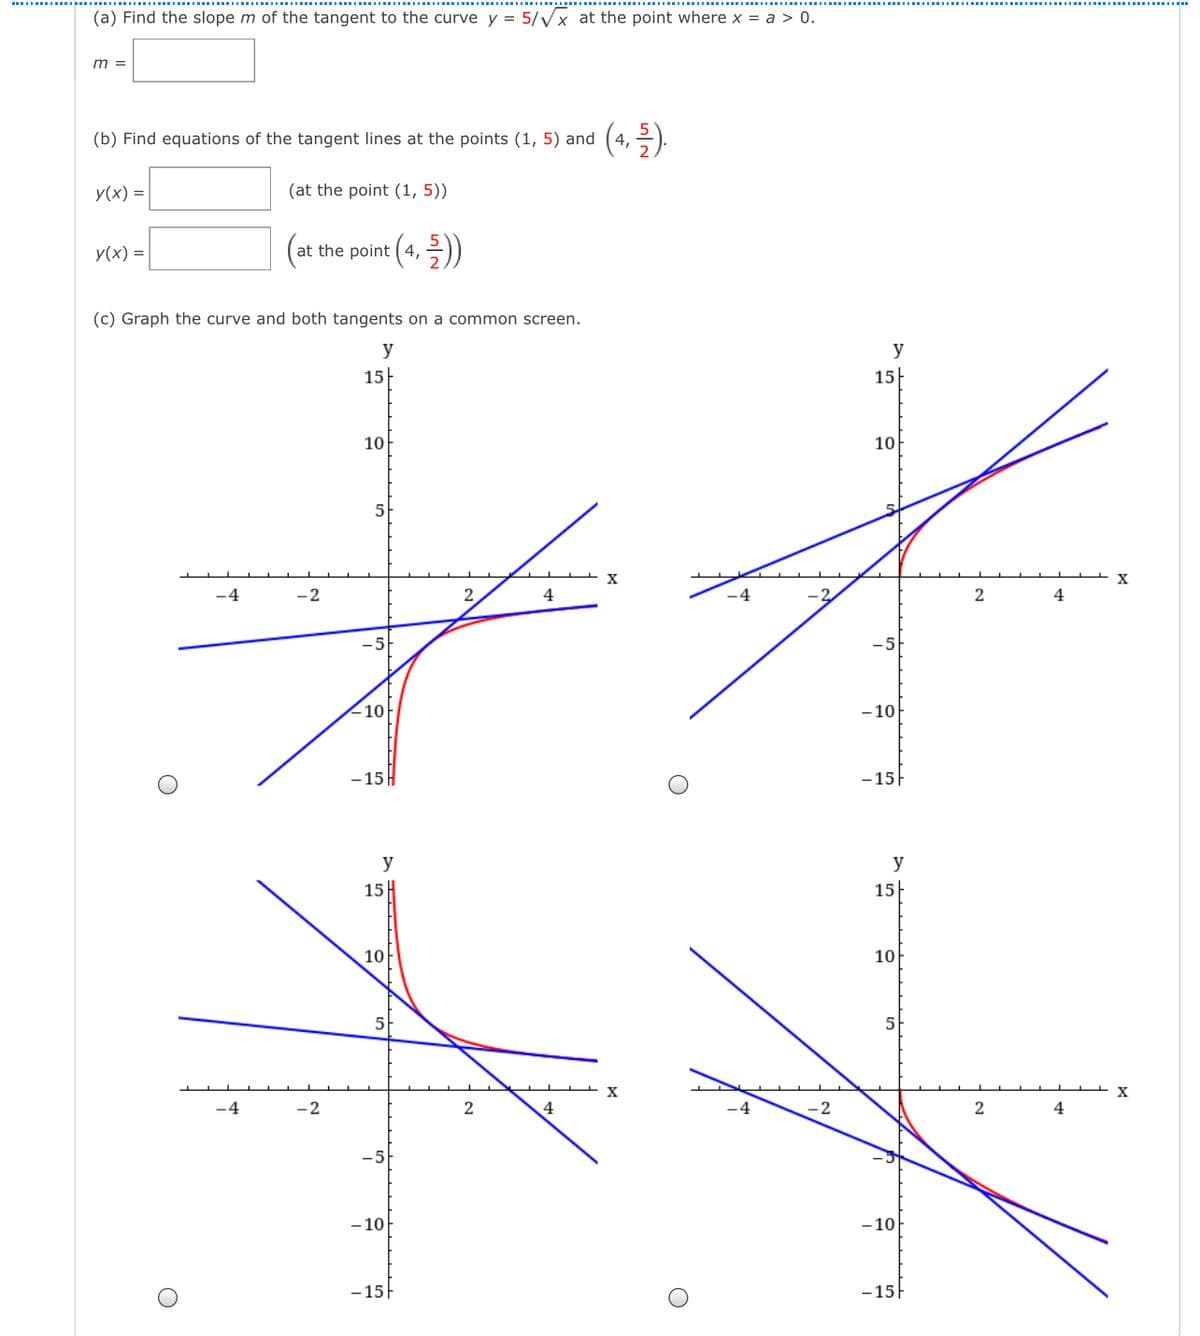 (a) Find the slope m of the tangent to the curve y = 5/Vx at the point where x = a > 0.
m =
(4. 3).
(b) Find equations of the tangent lines at the points (1, 5) and
y(x) =
(at the point (1, 5))
У (x) %3
at the point ( 4,
(c) Graph the curve and both tangents on a common screen.
y
y
15-
15|
10
10
5-
-4
-2
2
4
4
-5
10
-10
- 15 H
-15F
y
y
15H
15|
10
10
5-
5
4
2
4
-5
- 10
-10
- 15|
- 15
